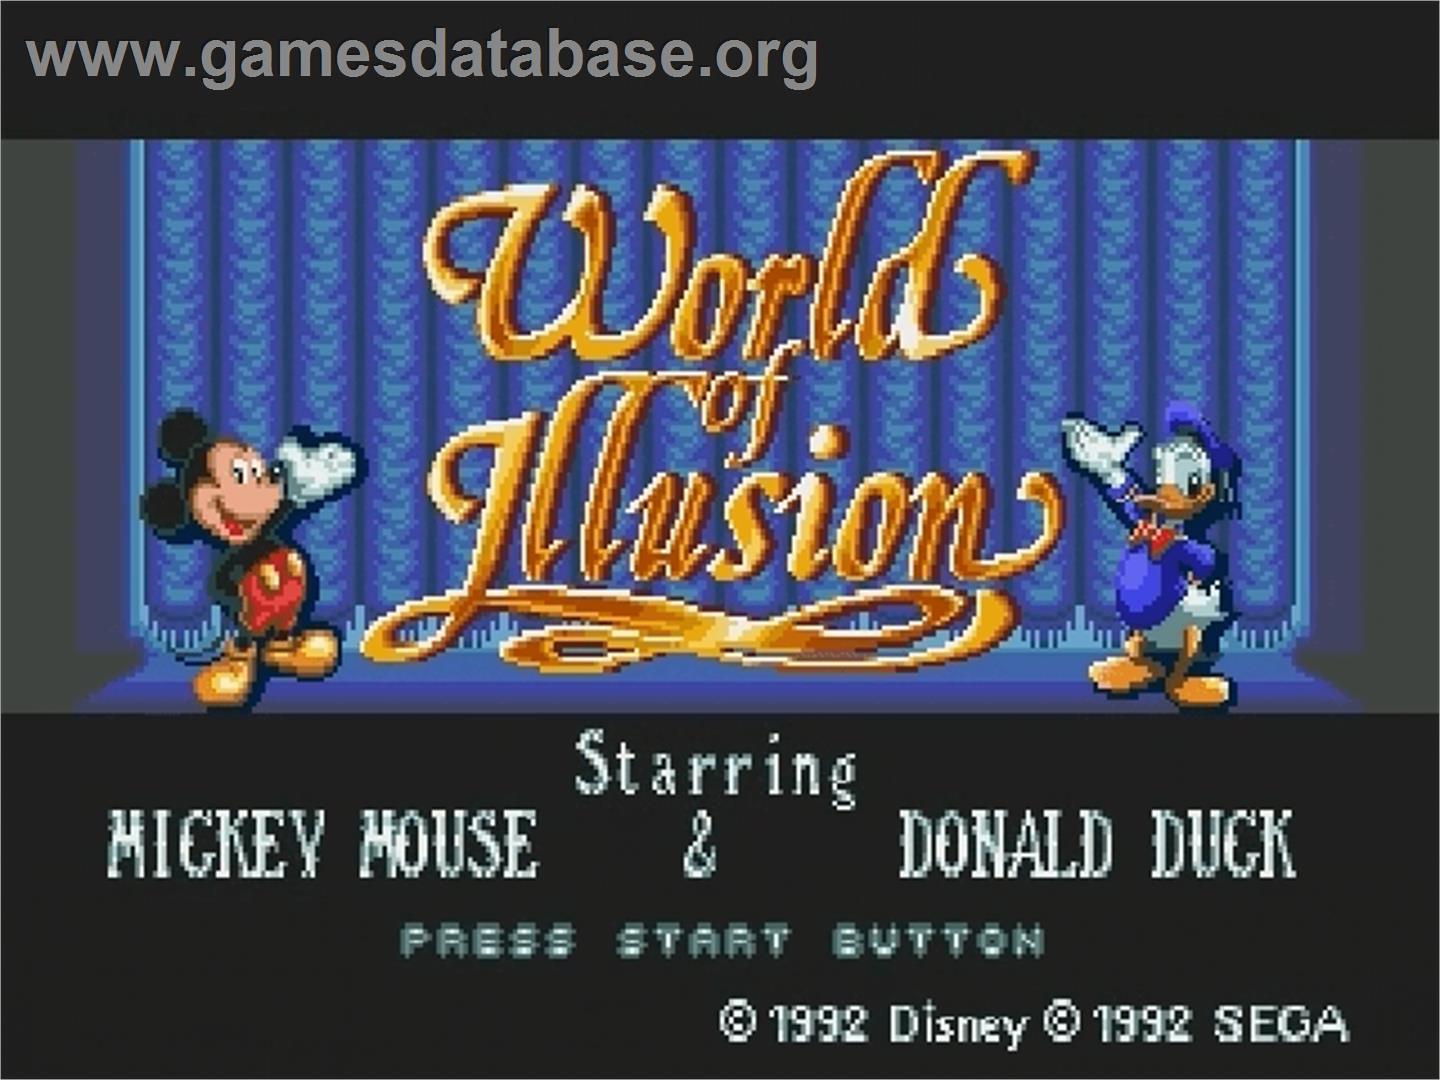 World of Illusion starring Mickey Mouse and Donald Duck - Sega Genesis - Artwork - Title Screen